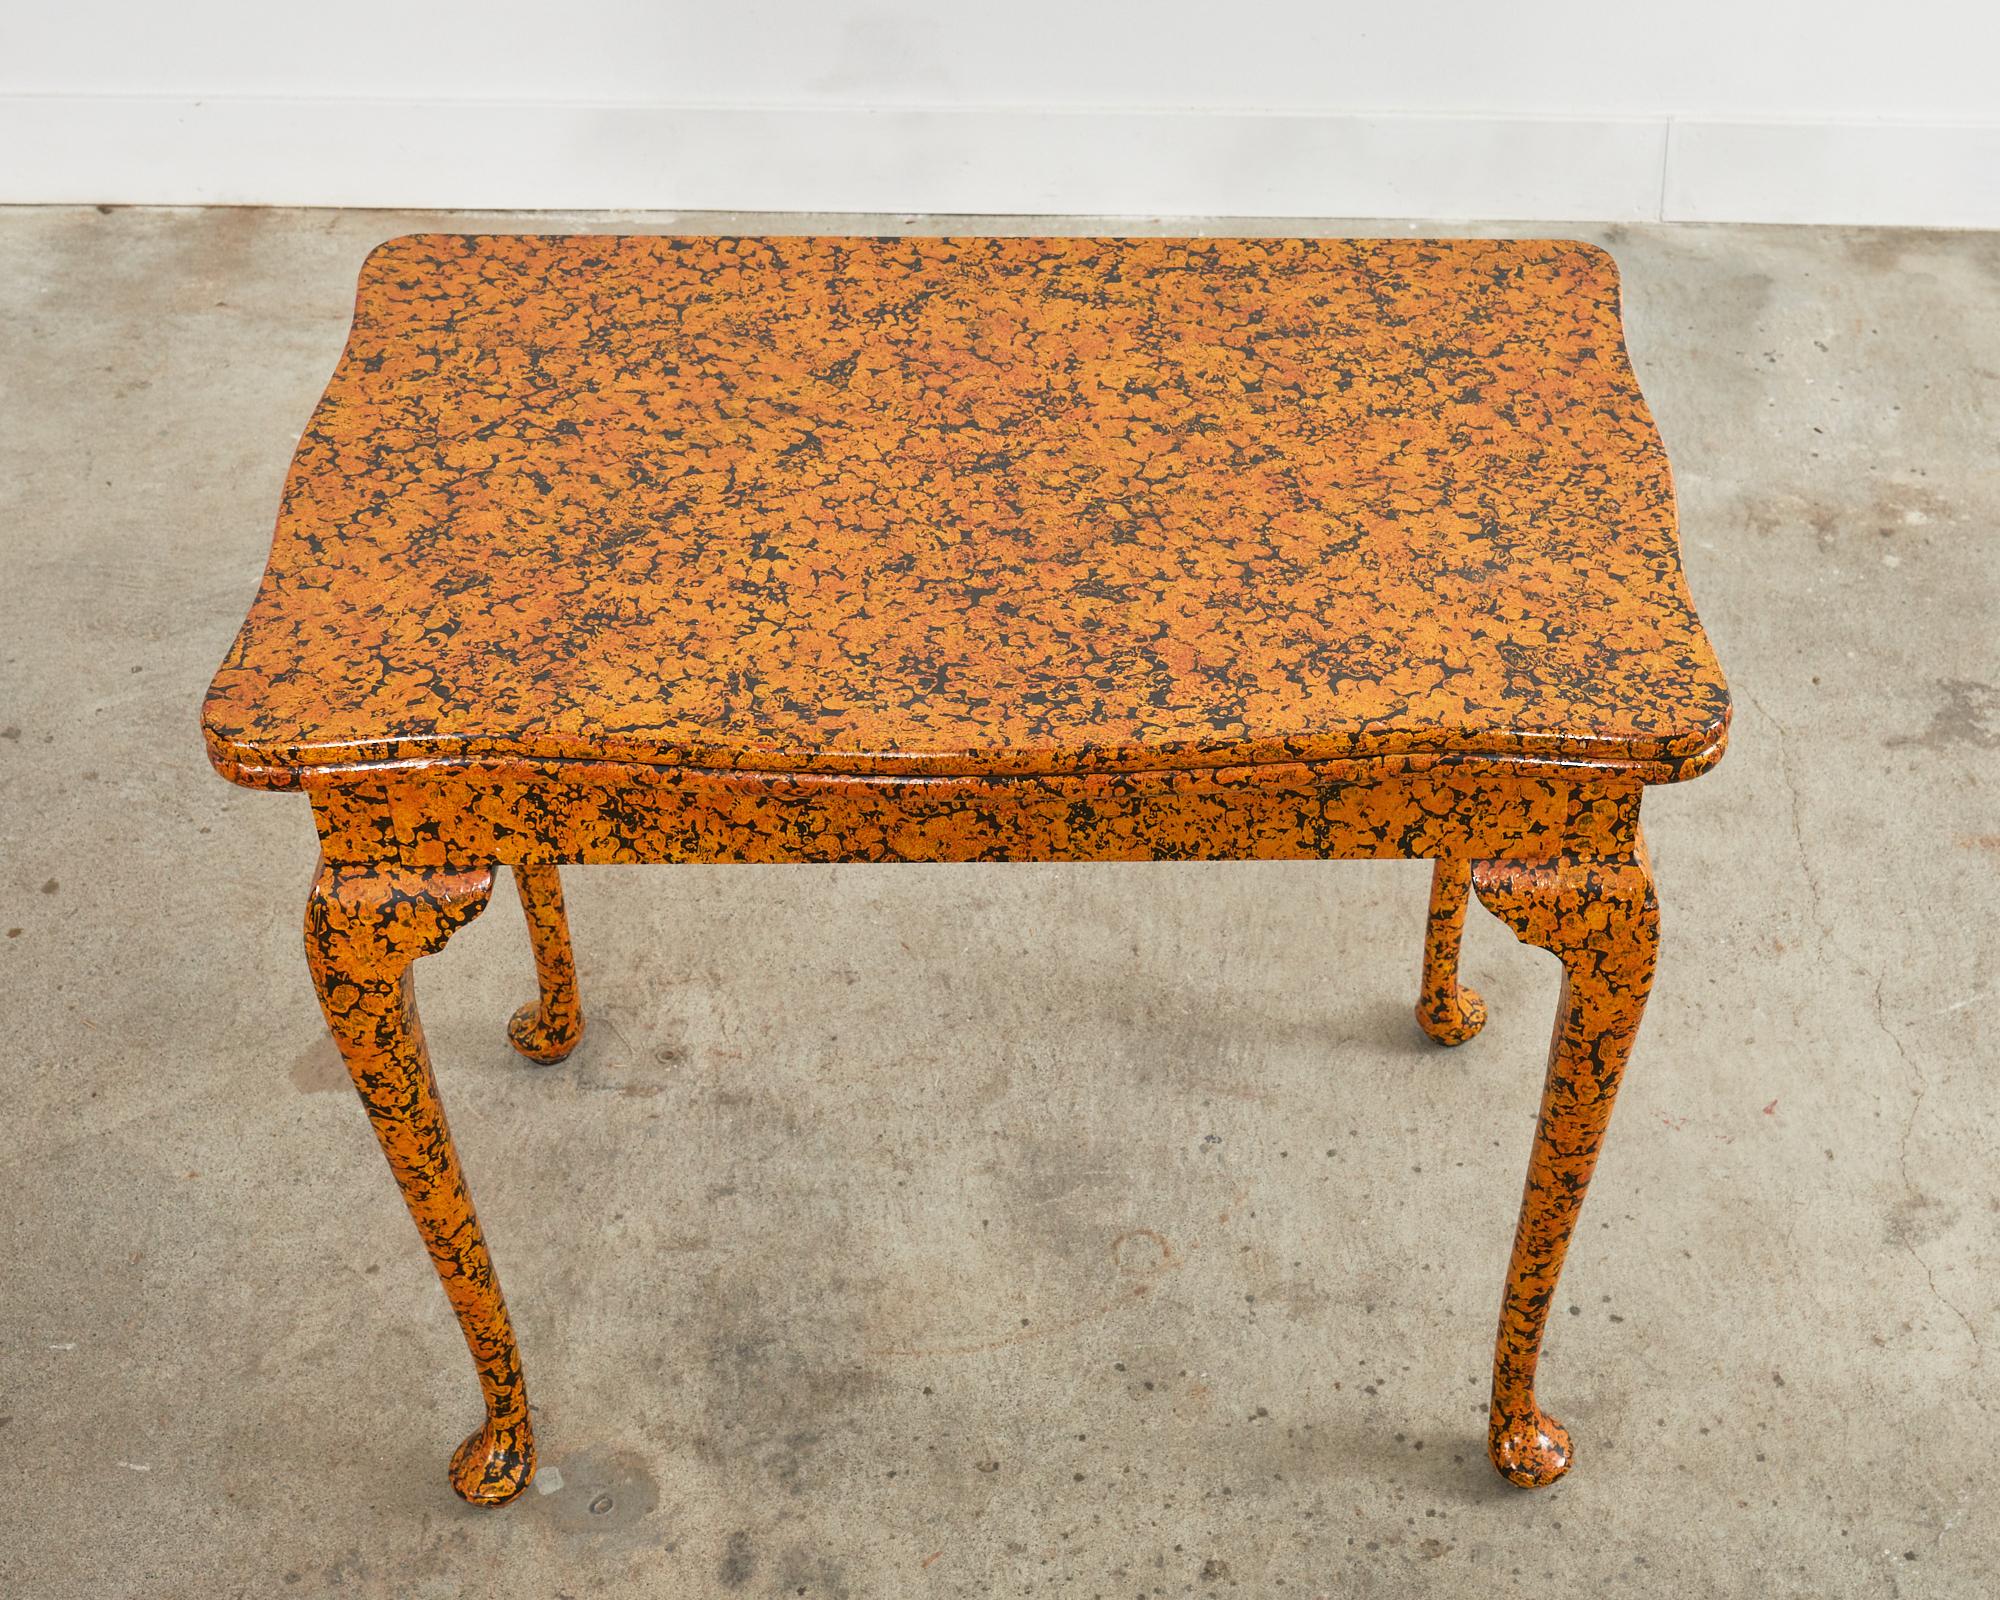 Queen Anne Style Games Table Desk Speckled by Ira Yeager 1